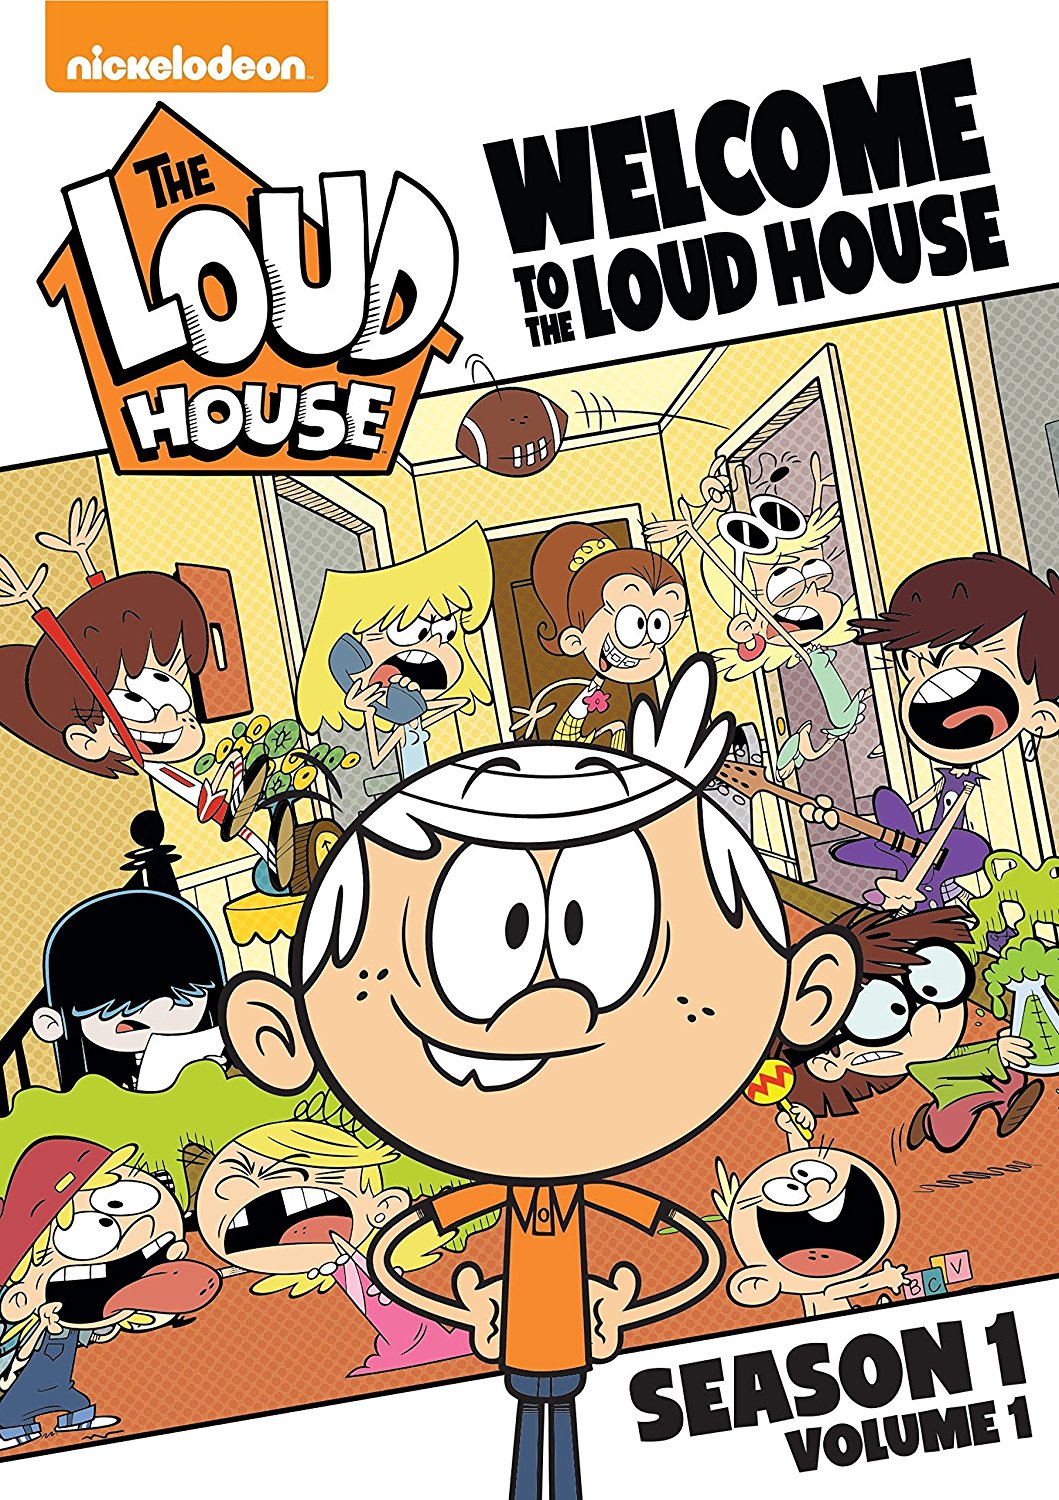 The Loud House Welcome to the Loud House The Loud House 